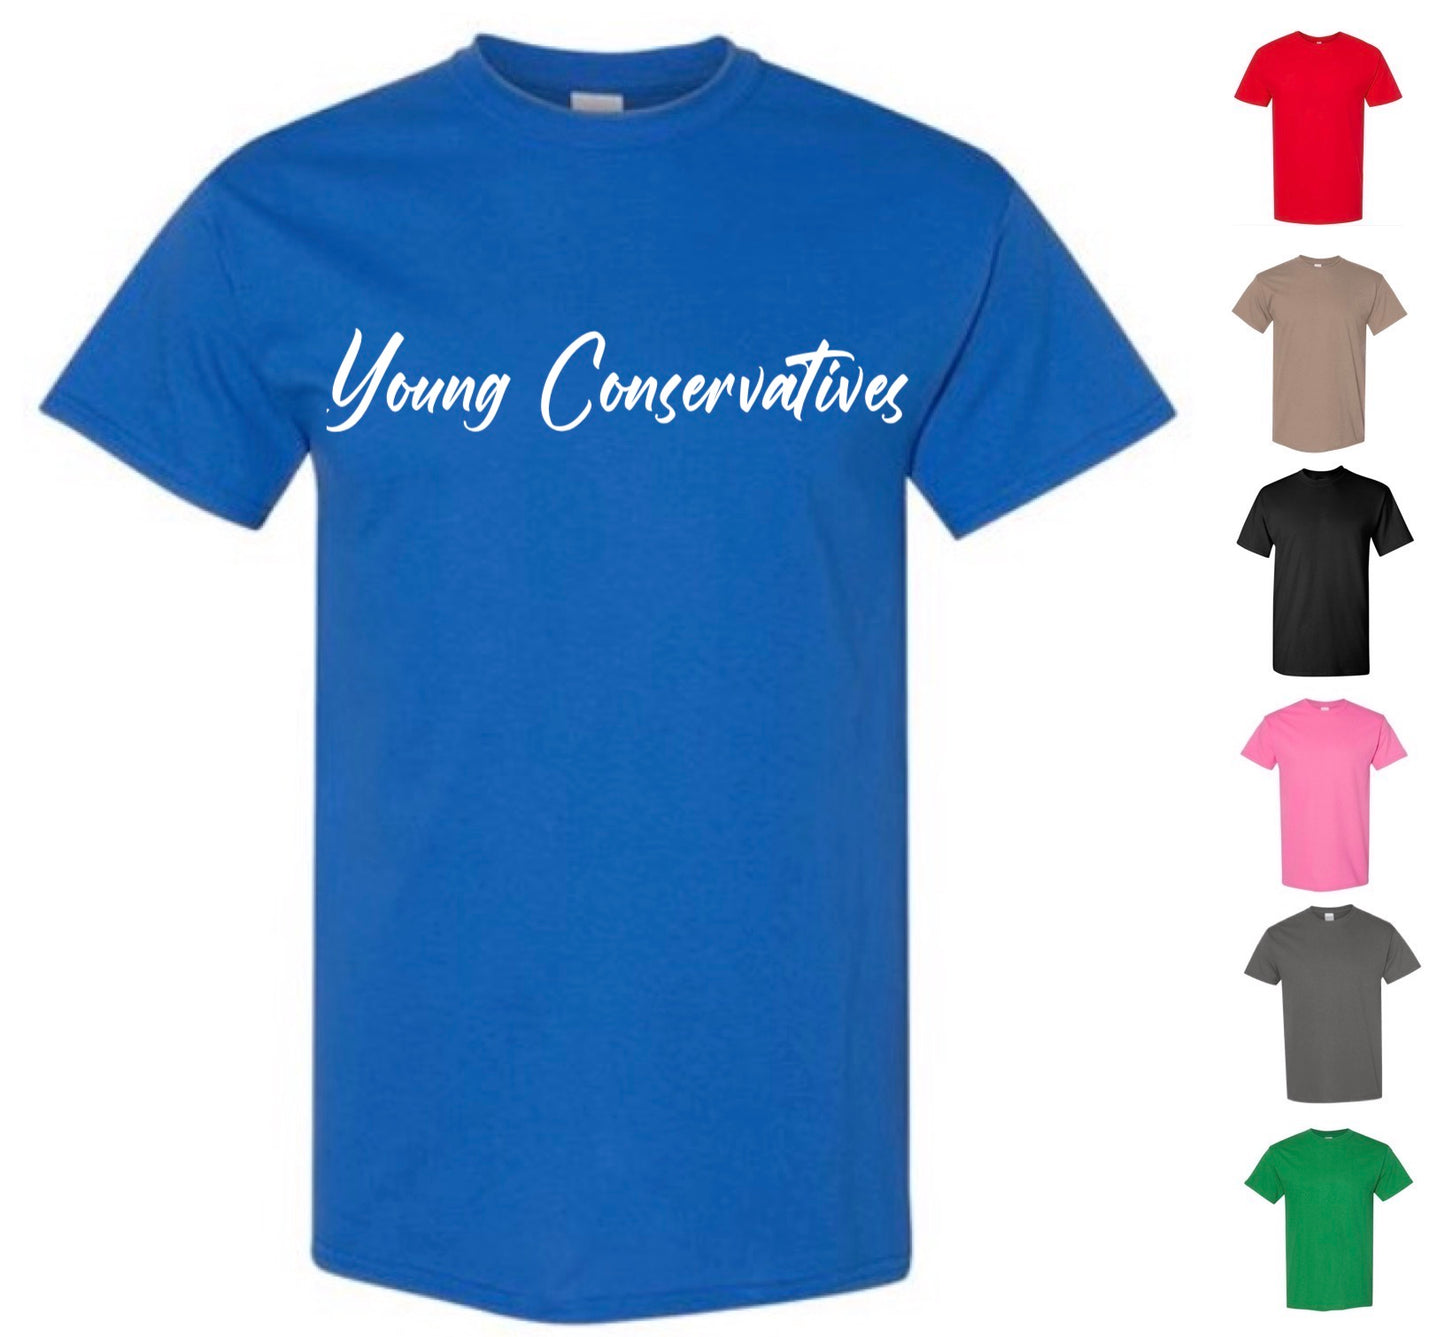 Young Conservatives T-shirt (FREE Shipping)